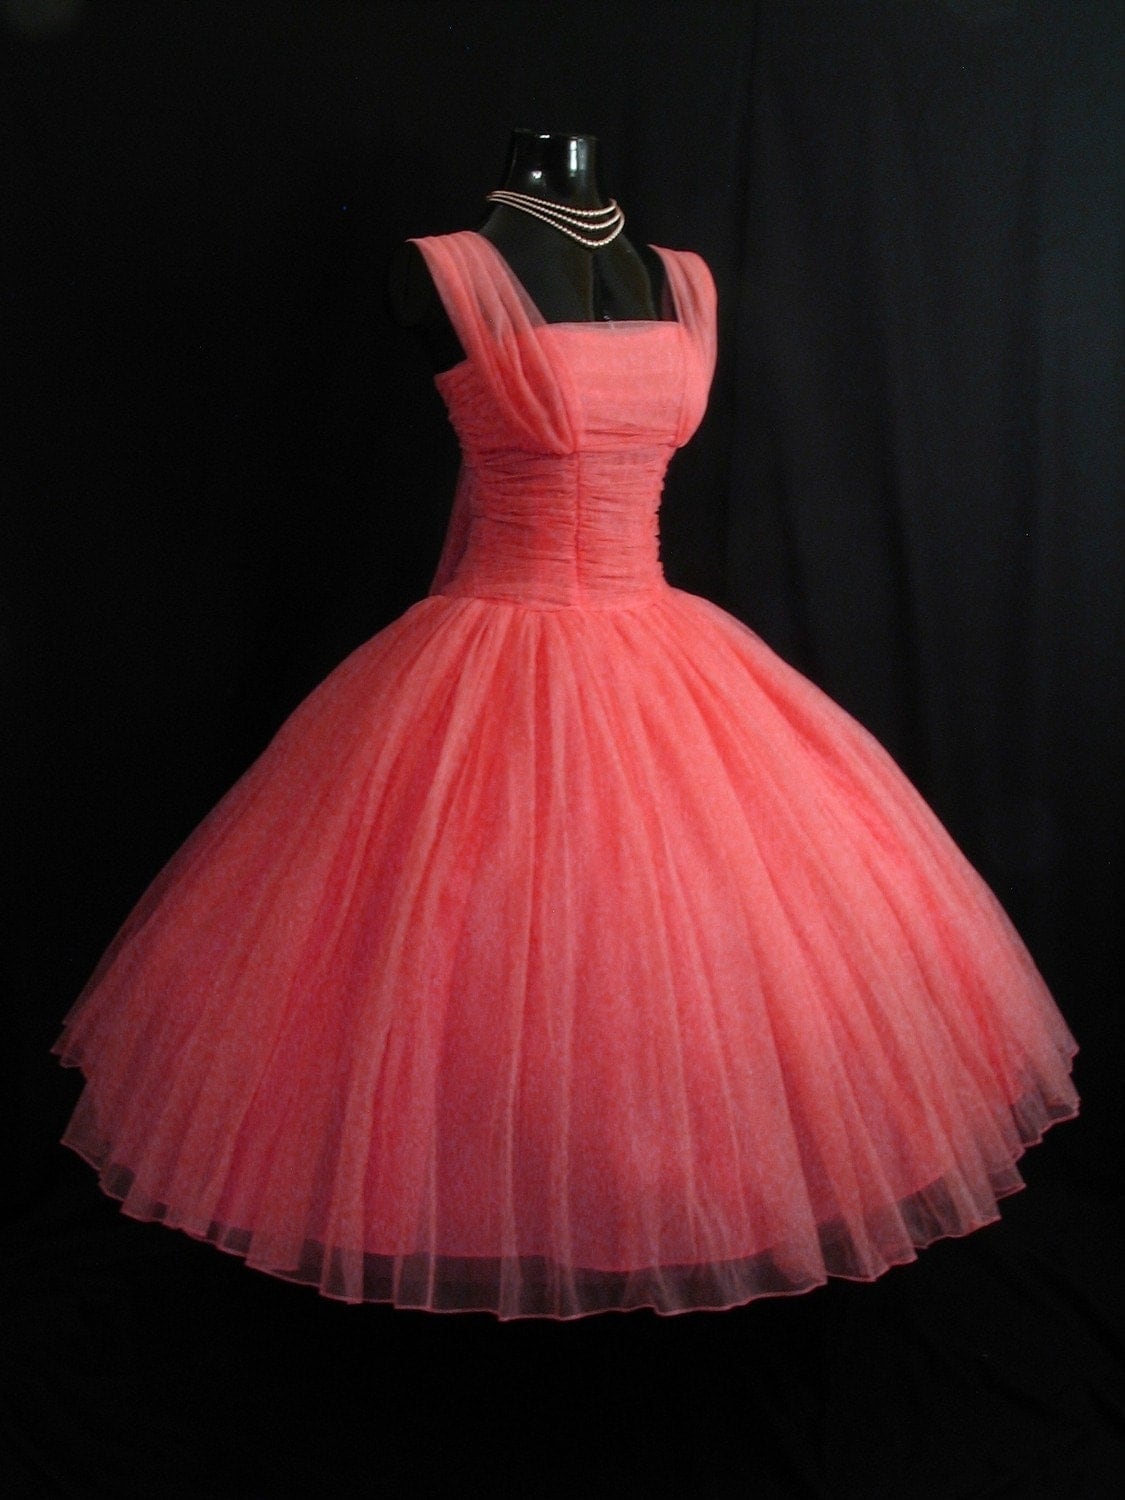 Displaying 15 Images For - 1950s Vintage Prom Dresses For Sale...